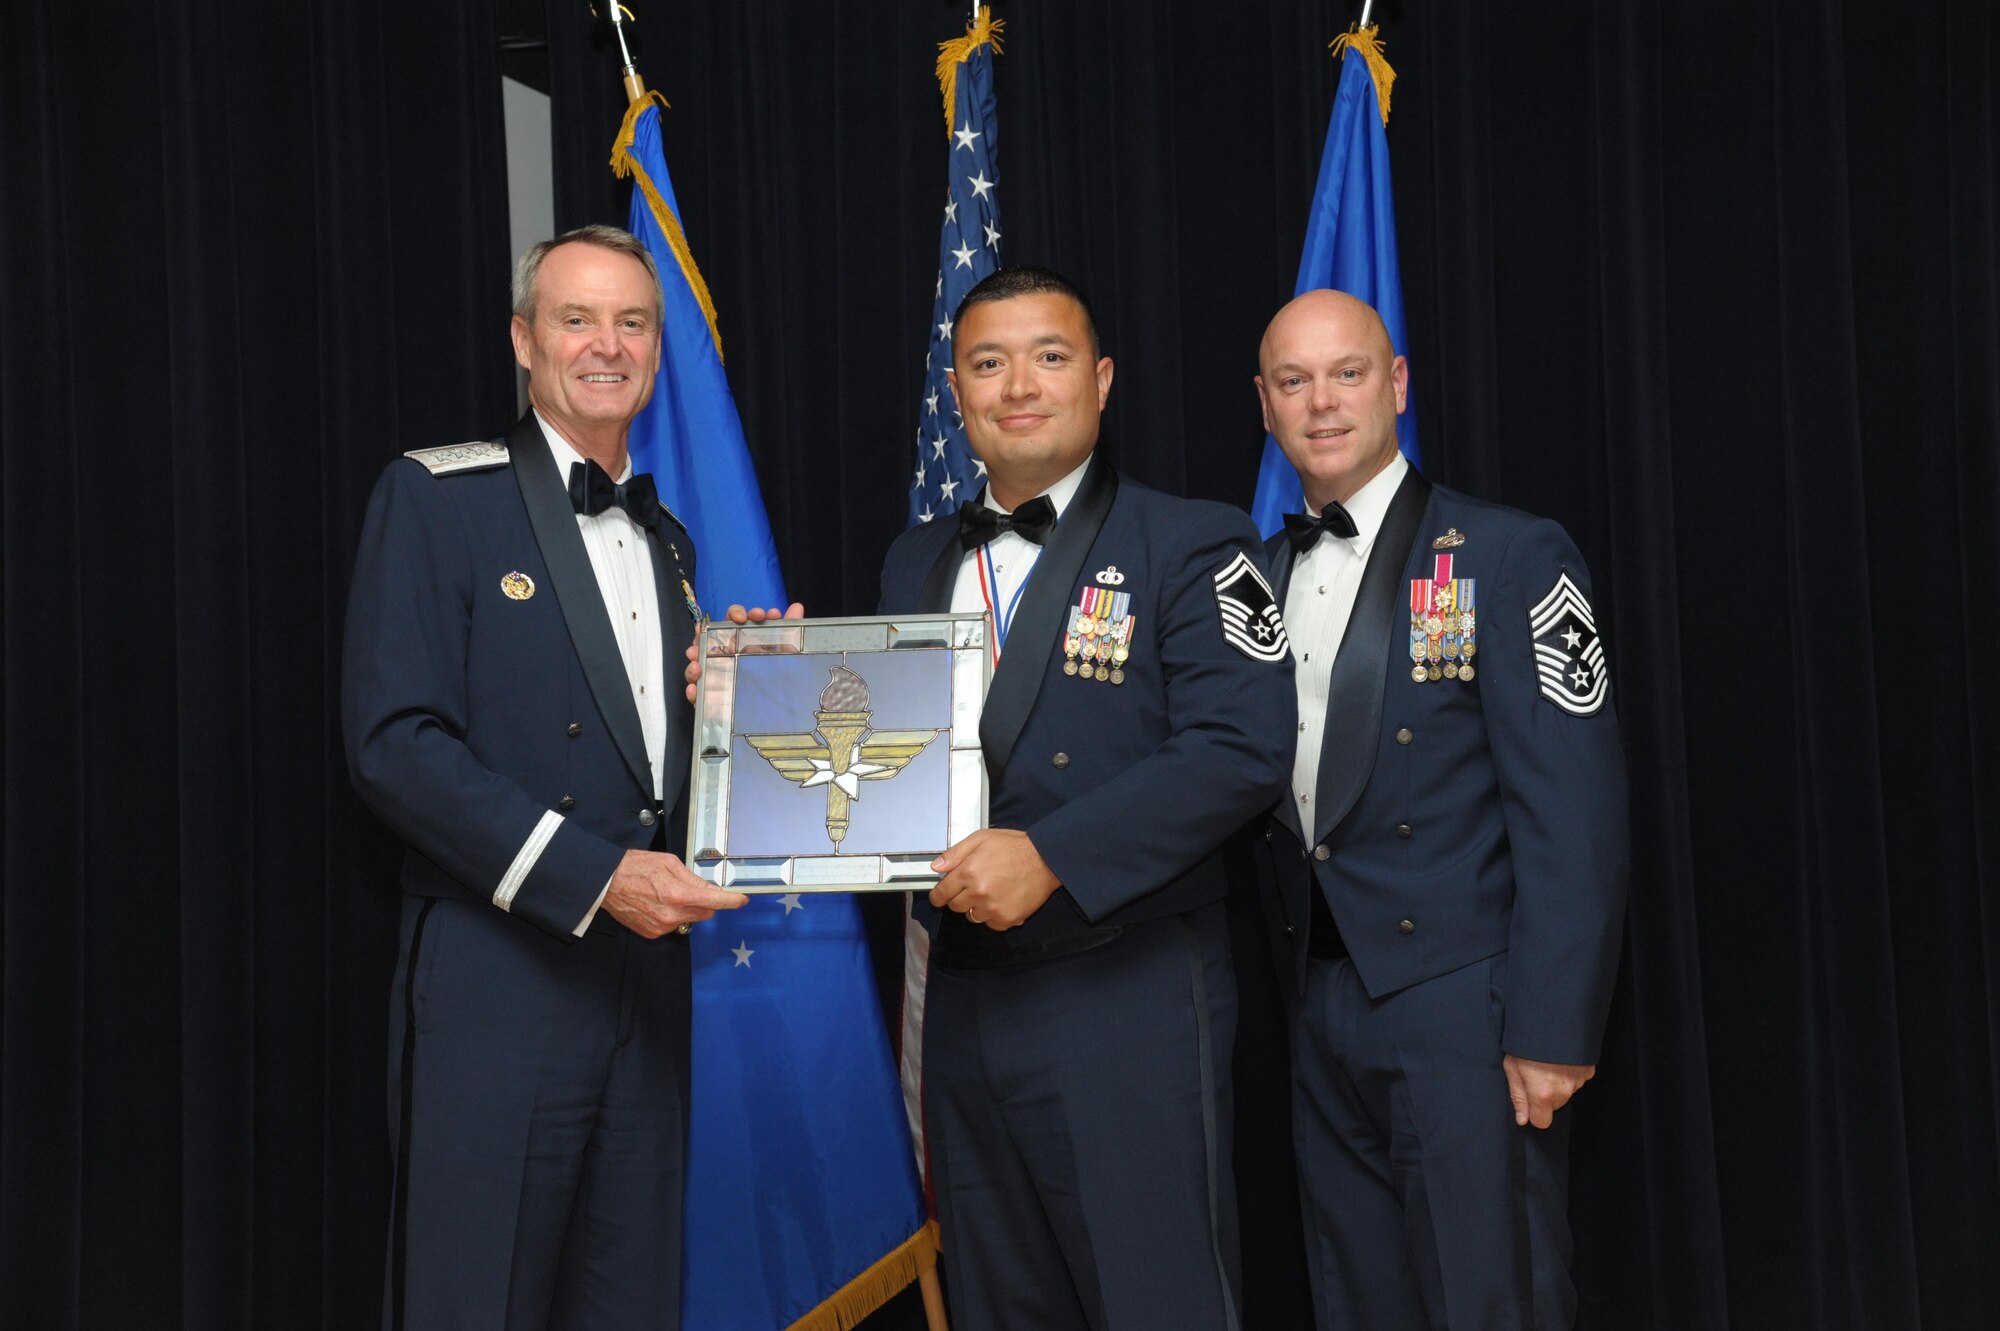 Senior Master Sgt. Joseph Arce, 14th Operations Support Squadron, Columbus Air Force Base, Mississippi, receives an award from Lt. Gen. Darryl Roberson, commander, Air Education and Training Command and AETC Command Chief Master Sgt. David Staton during a ceremony here, June 16. Arce was selected as the AETC Senior NCO of the Year. (U.S. Air Force photo by Joel Martinez)